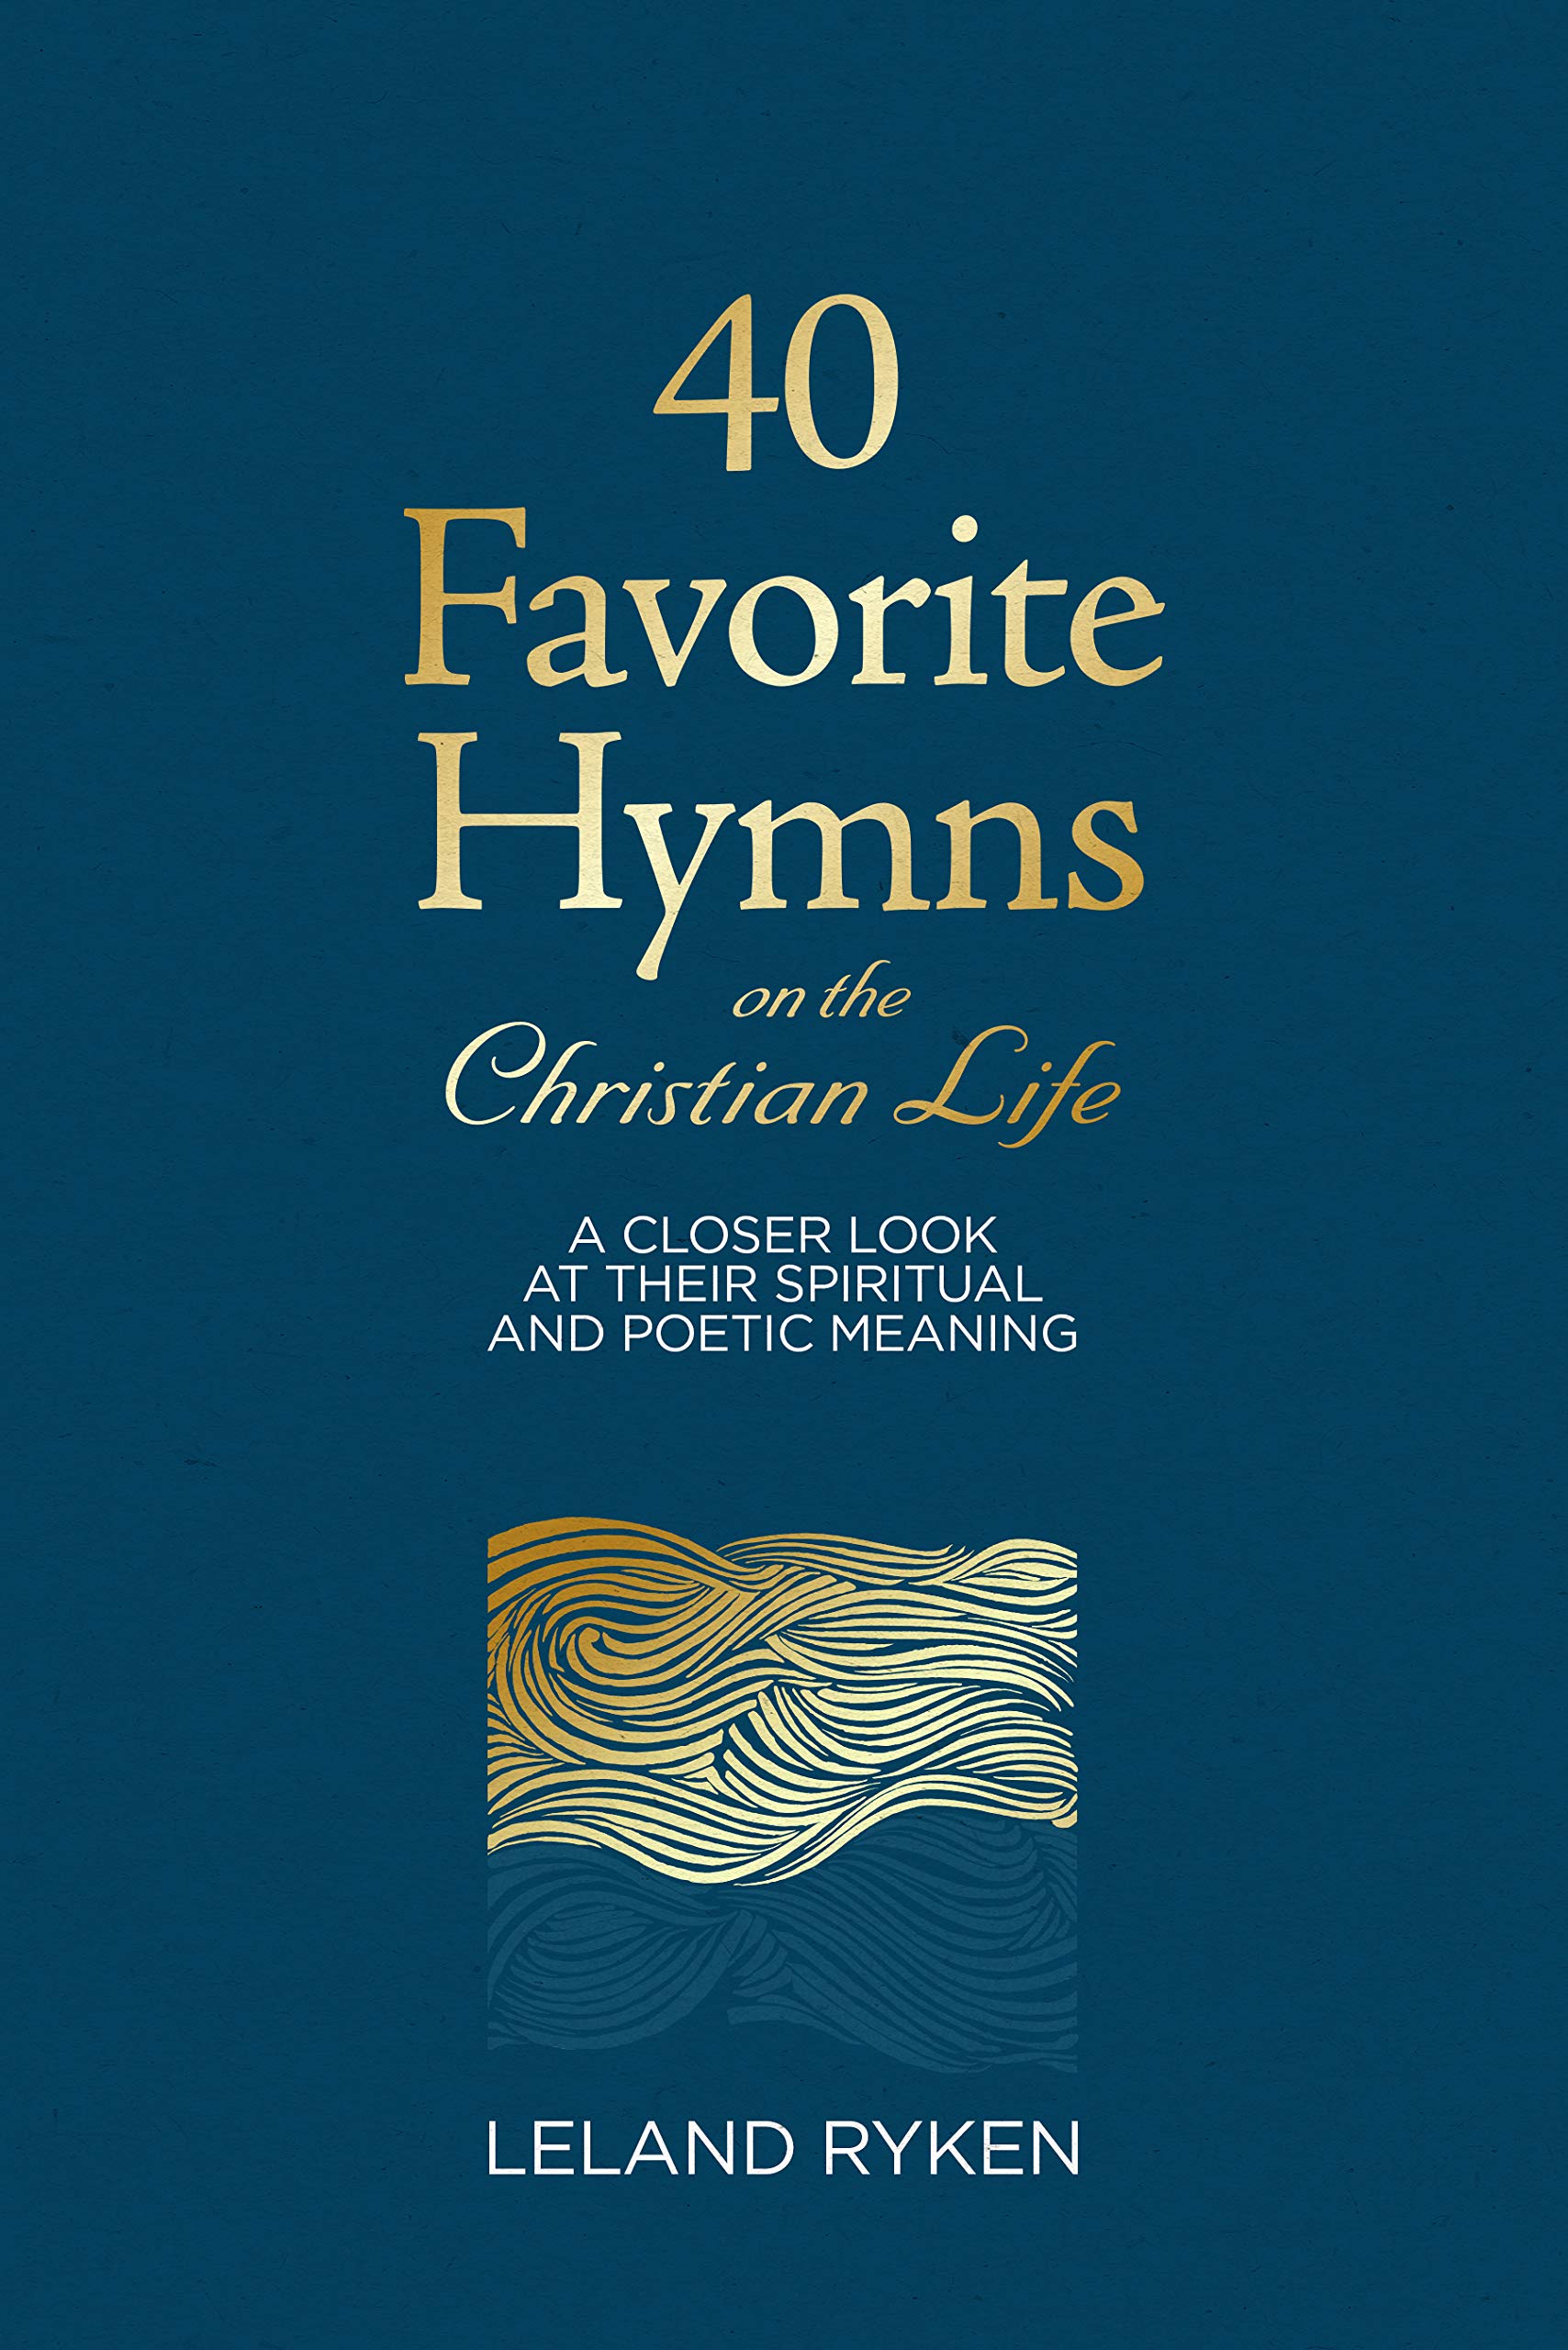 Book Notice: 40 FAVORITE HYMNS ON THE CHRISTIAN LIFE: A CLOSER LOOK AT THEIR SPIRITUAL AND POETIC MEANING, by Leland Ryken